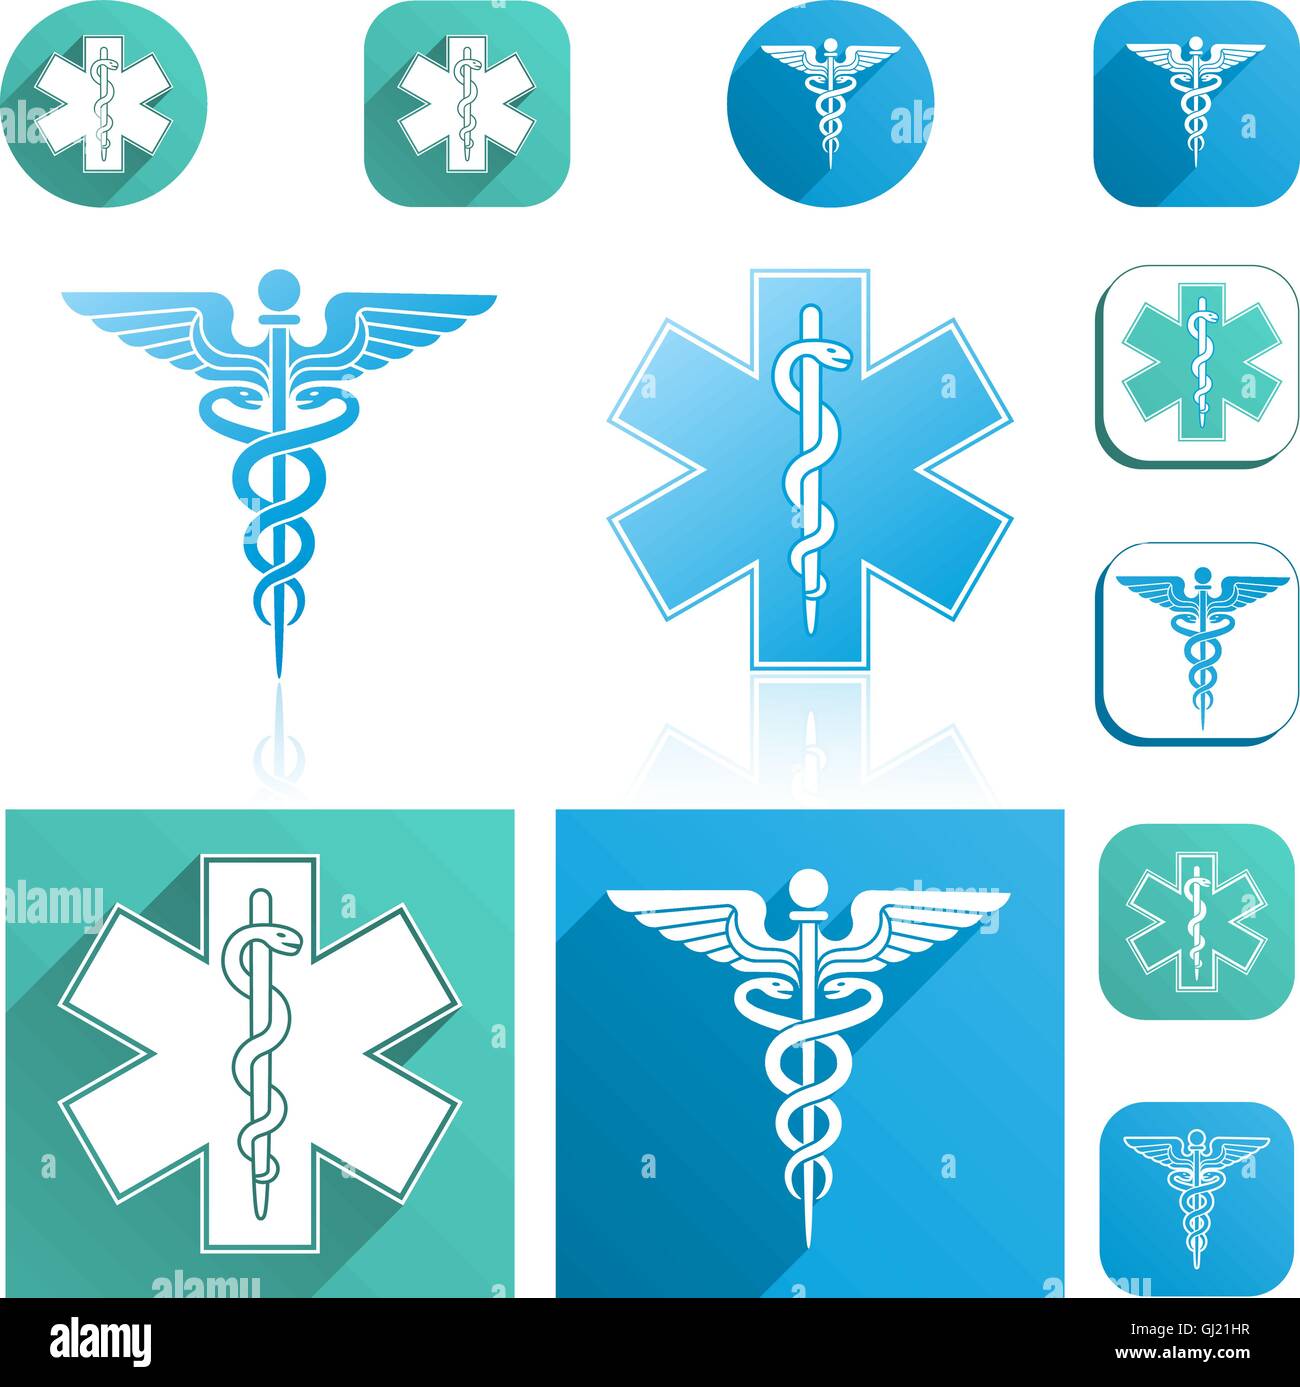 A Caduceus and Esculapius Staff Icons Set with modern colors. Stock Vector